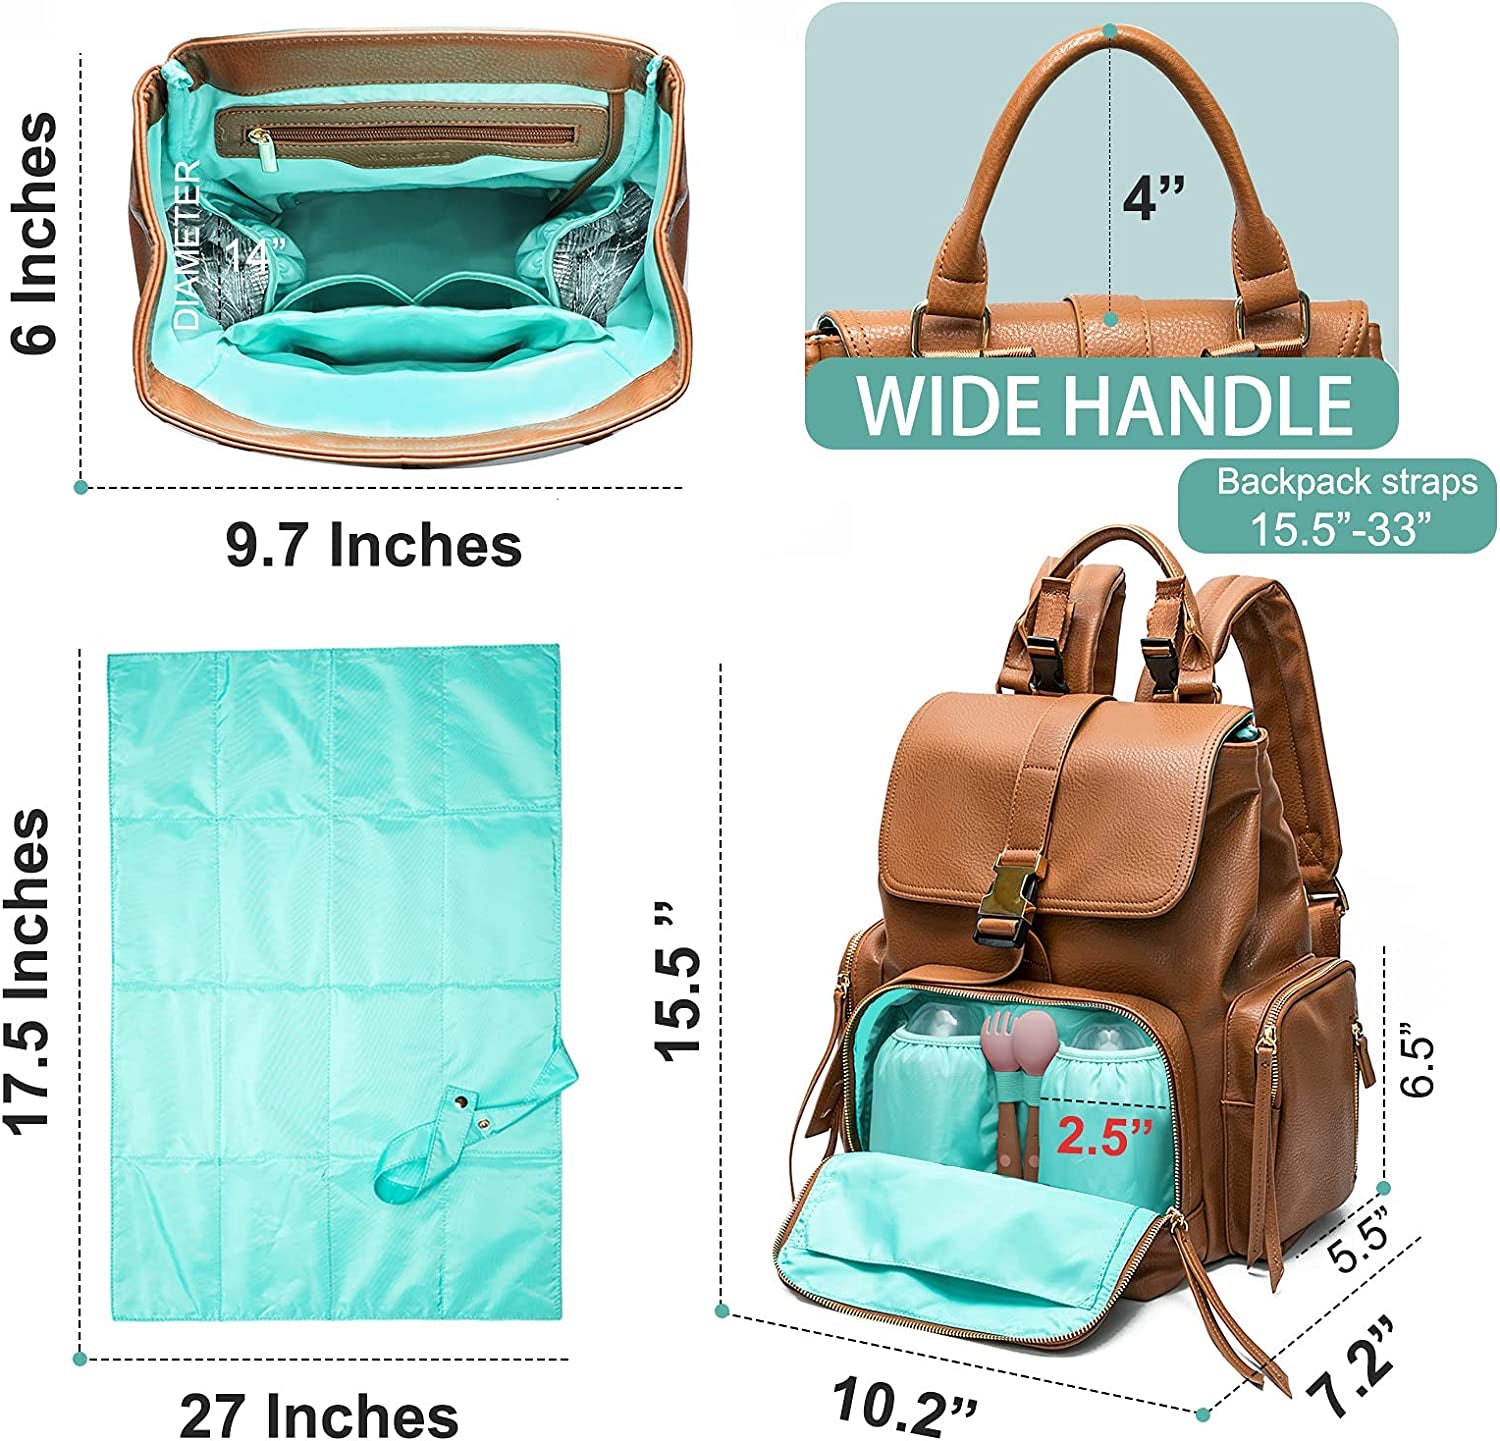 Baby Changing Bag Baby Bag Backpack with Portable Changing Mat & Tableware Holder by Miss Fong Leather Nappy Changing Bag Diaper Bag Travel Rucksack for Mums and Dads